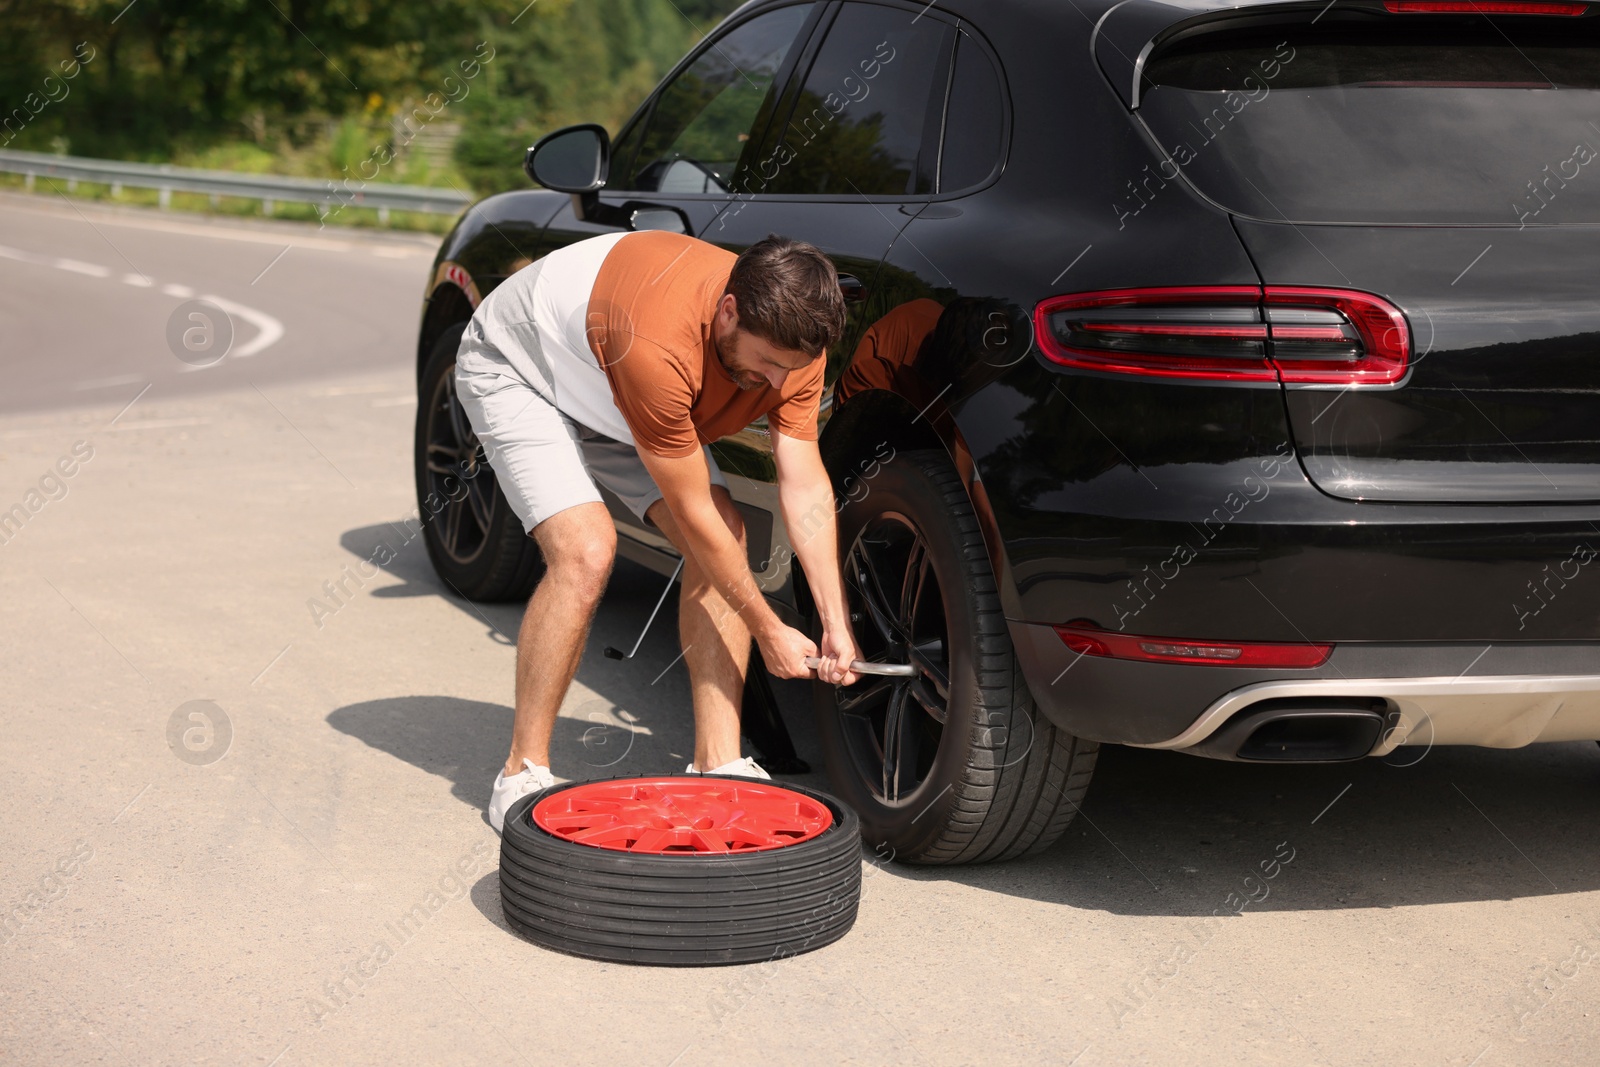 Photo of Man changing wheel of car on roadside outdoors